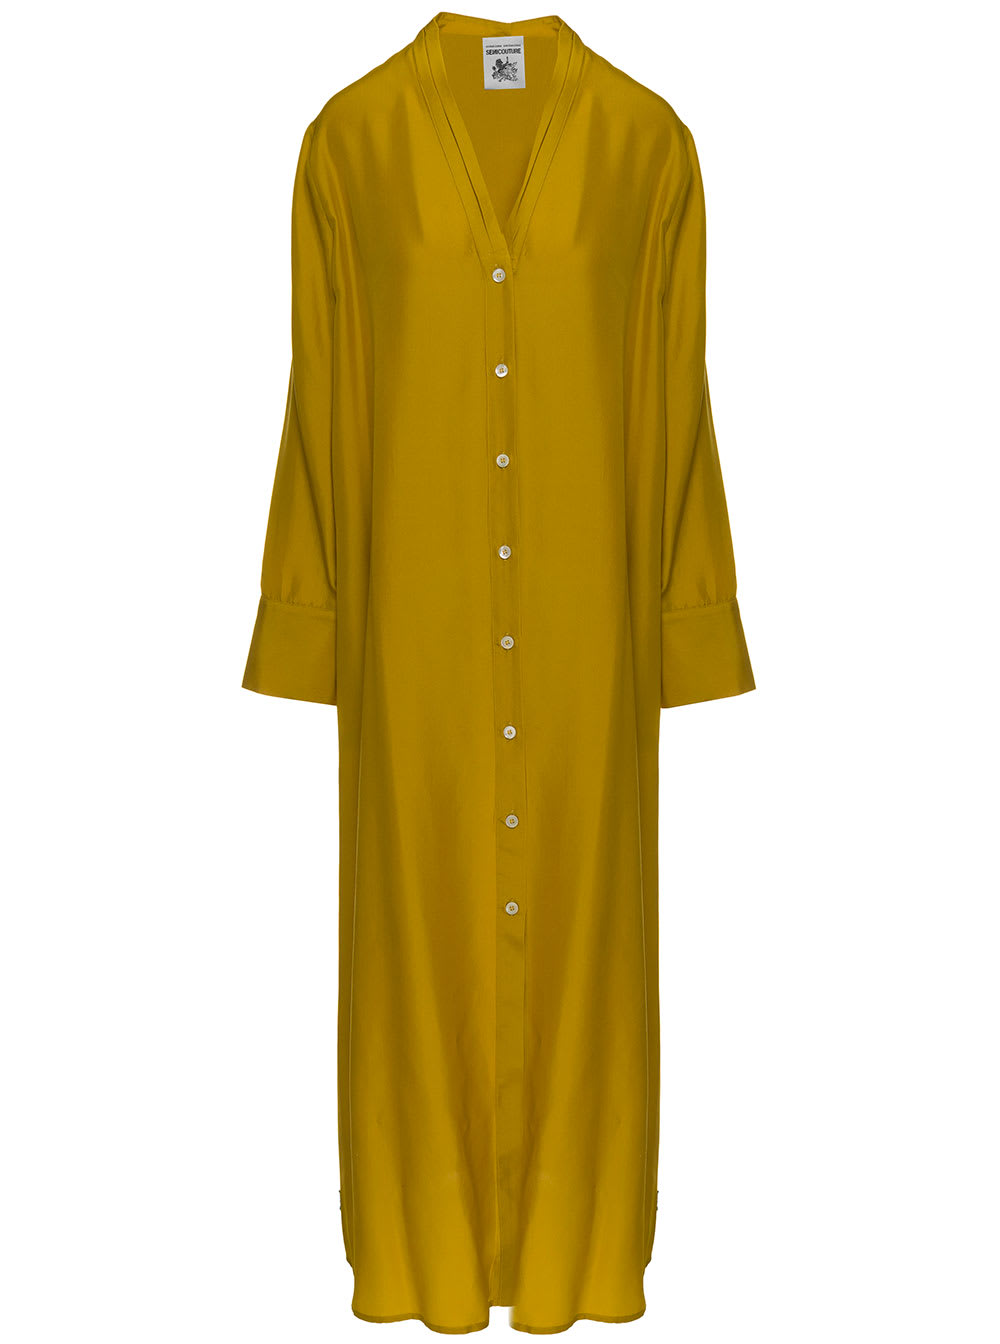 Semicouture Womans Mustard Colored Chemisier Long Dress